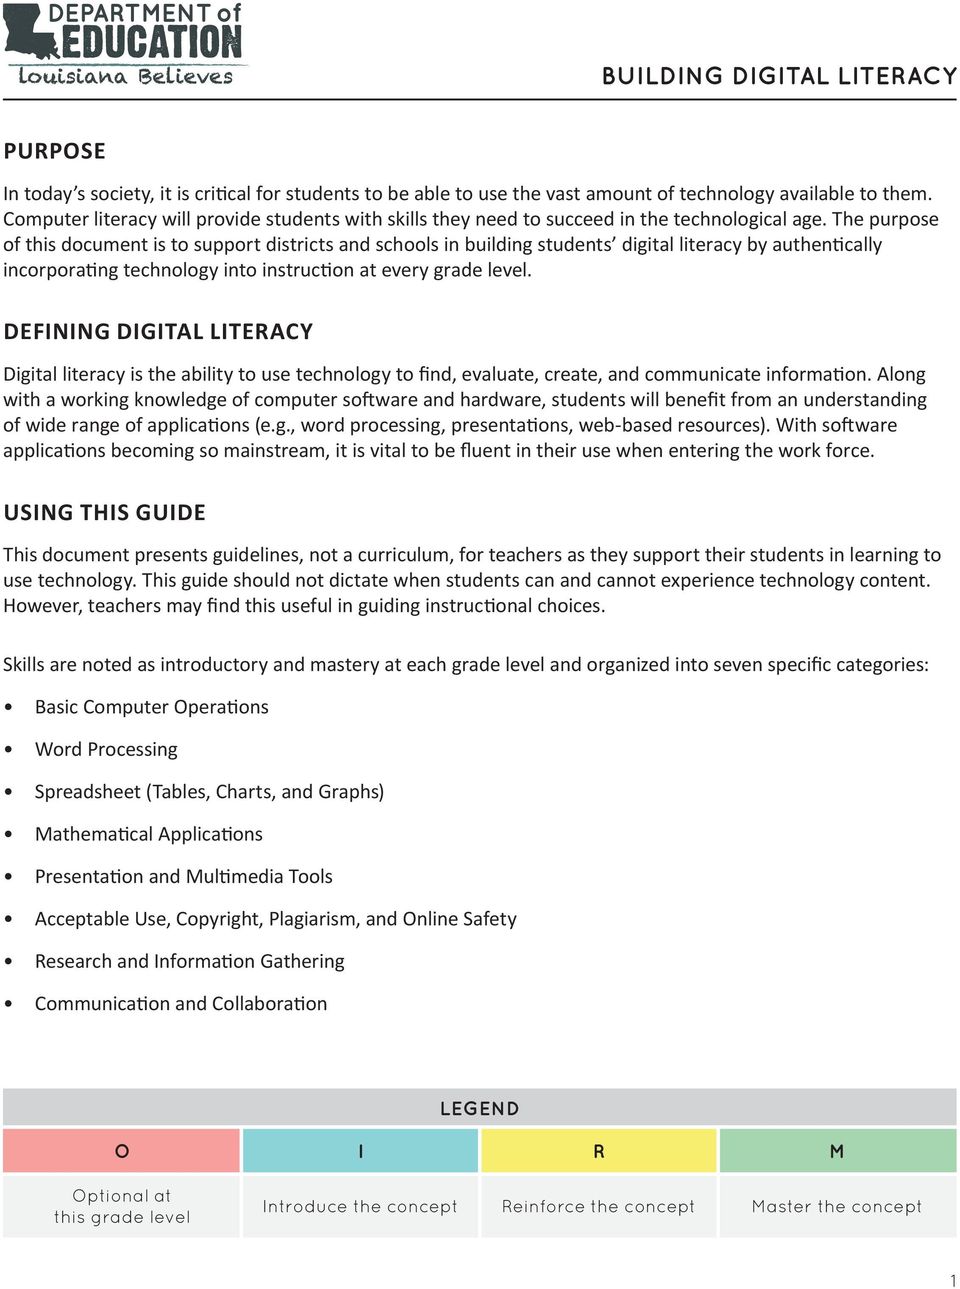 The purpose of this document is to support districts and schools in building students digital literacy by authentically incorporating technology into instruction at every grade level.